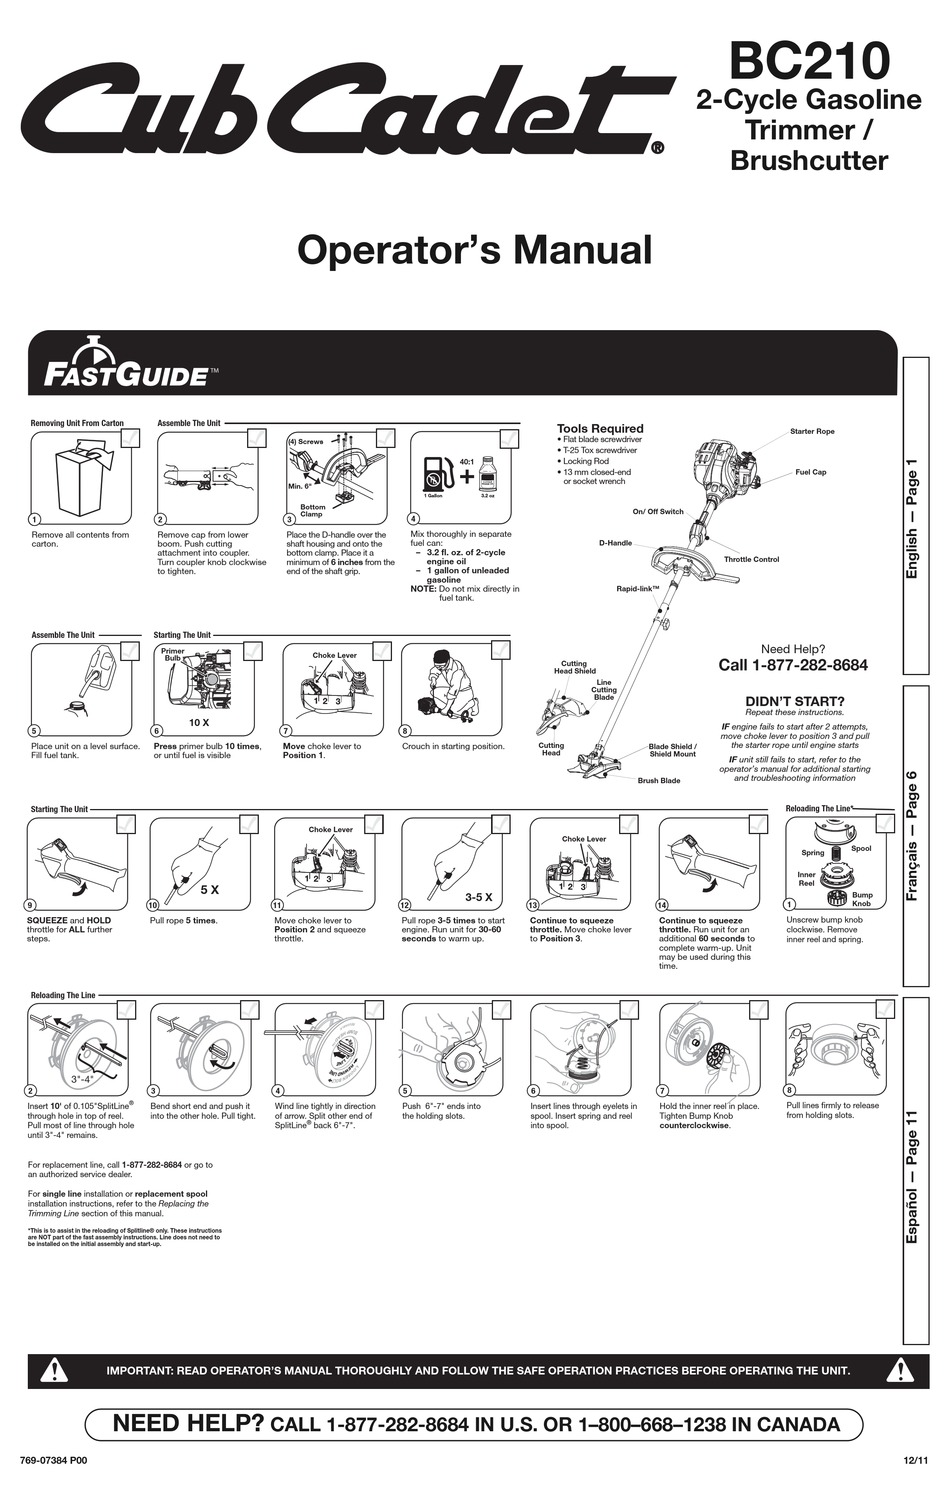 Cleaning And Storage; Troubleshooting Chart; Specifications - Cub Cadet BC  210 Operator's Manual [Page 5]